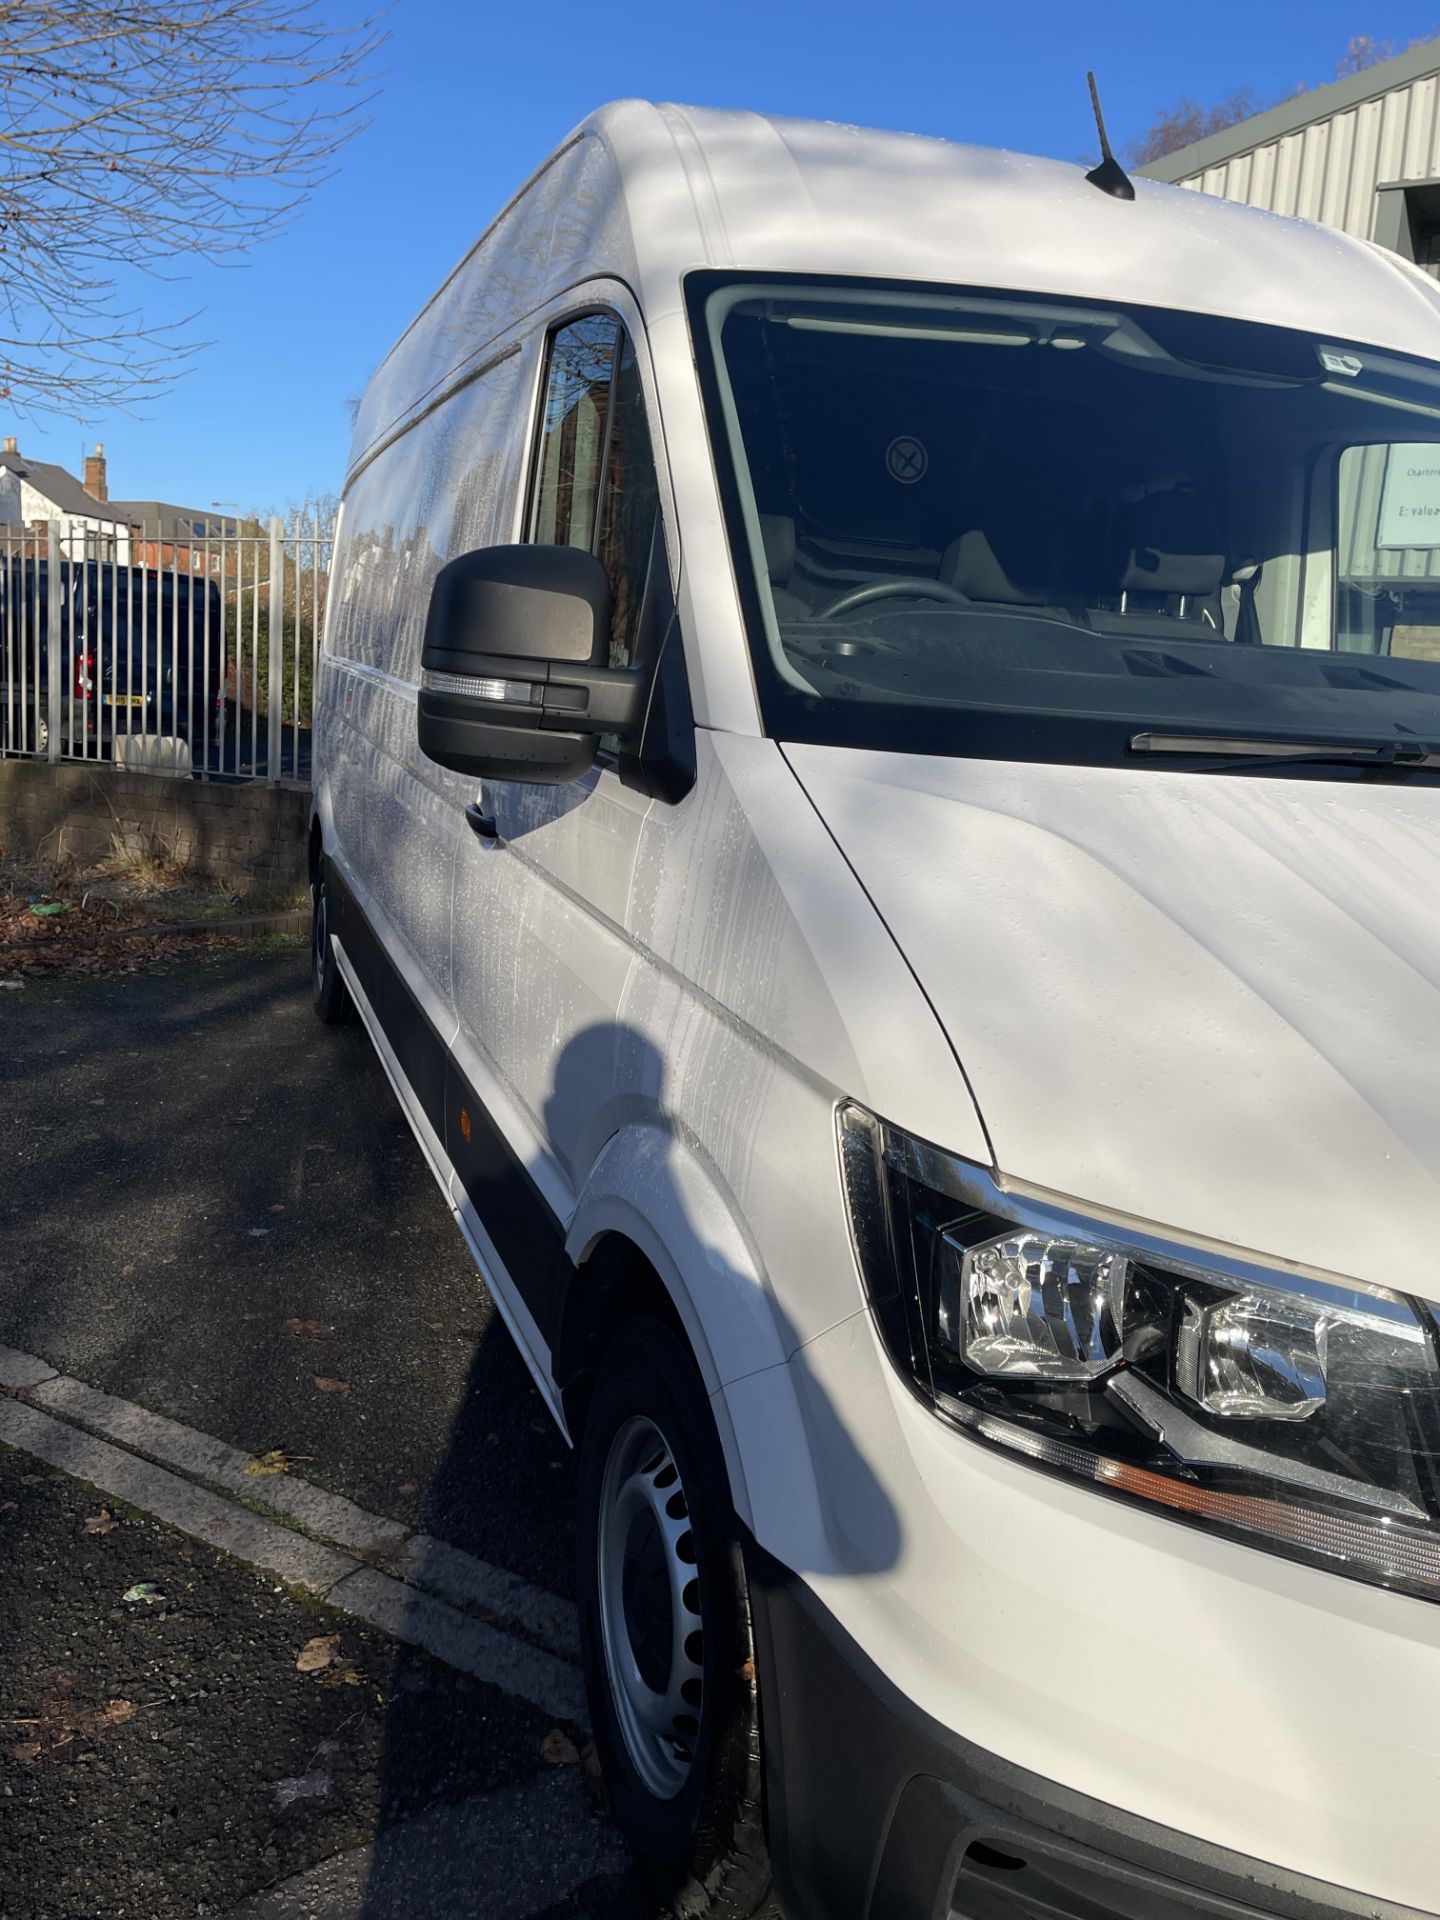 2018 - VW Crafter CR35 102PS Trend Line LWB TDI - Image 5 of 34